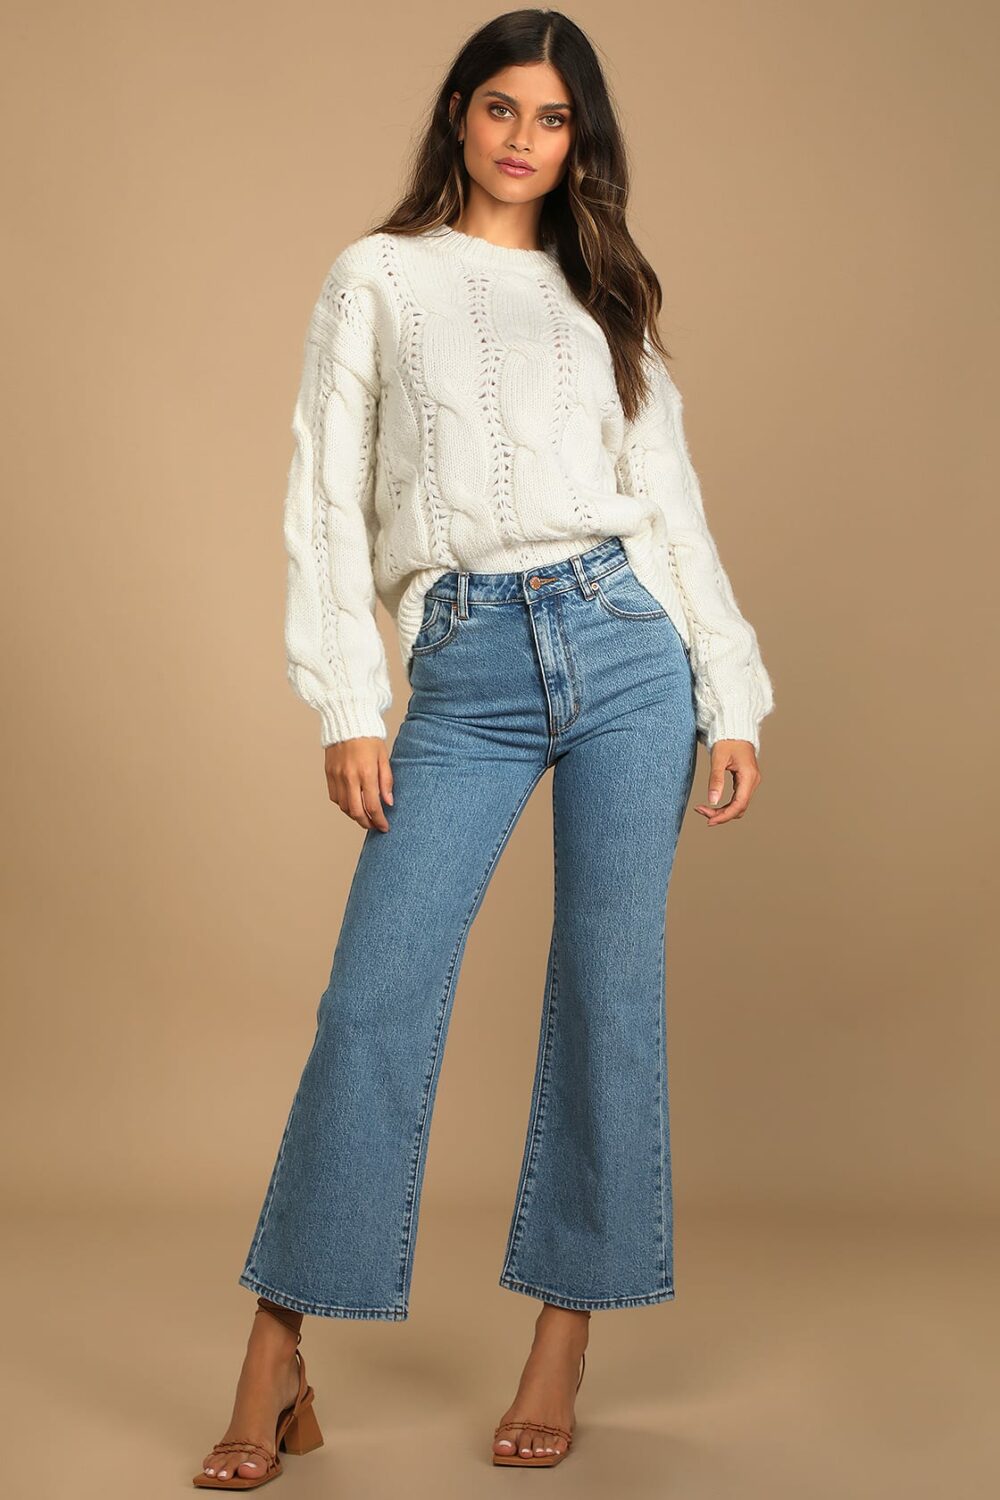 The oversized cream cable knit sweater has a rounded neckline long balloon sleeves with drop shoulders. Wear it with leggings or skinny jeans to highlight the somewhat large bodice.